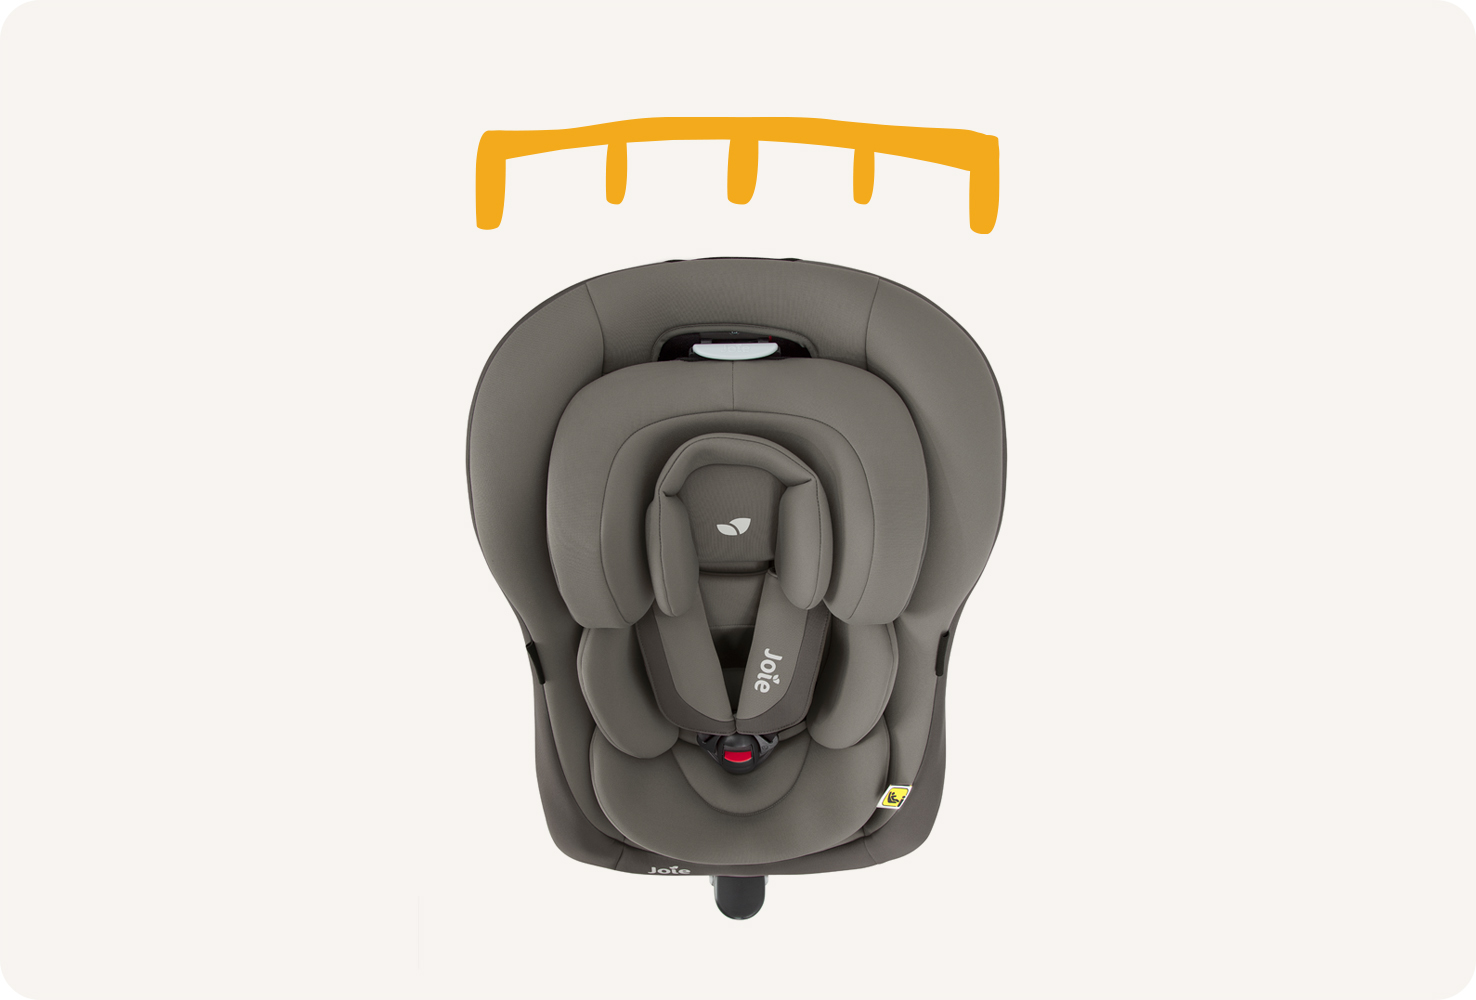   Joie spin 360 car seat in two-tone gray straight on with ruler icon above the seat.